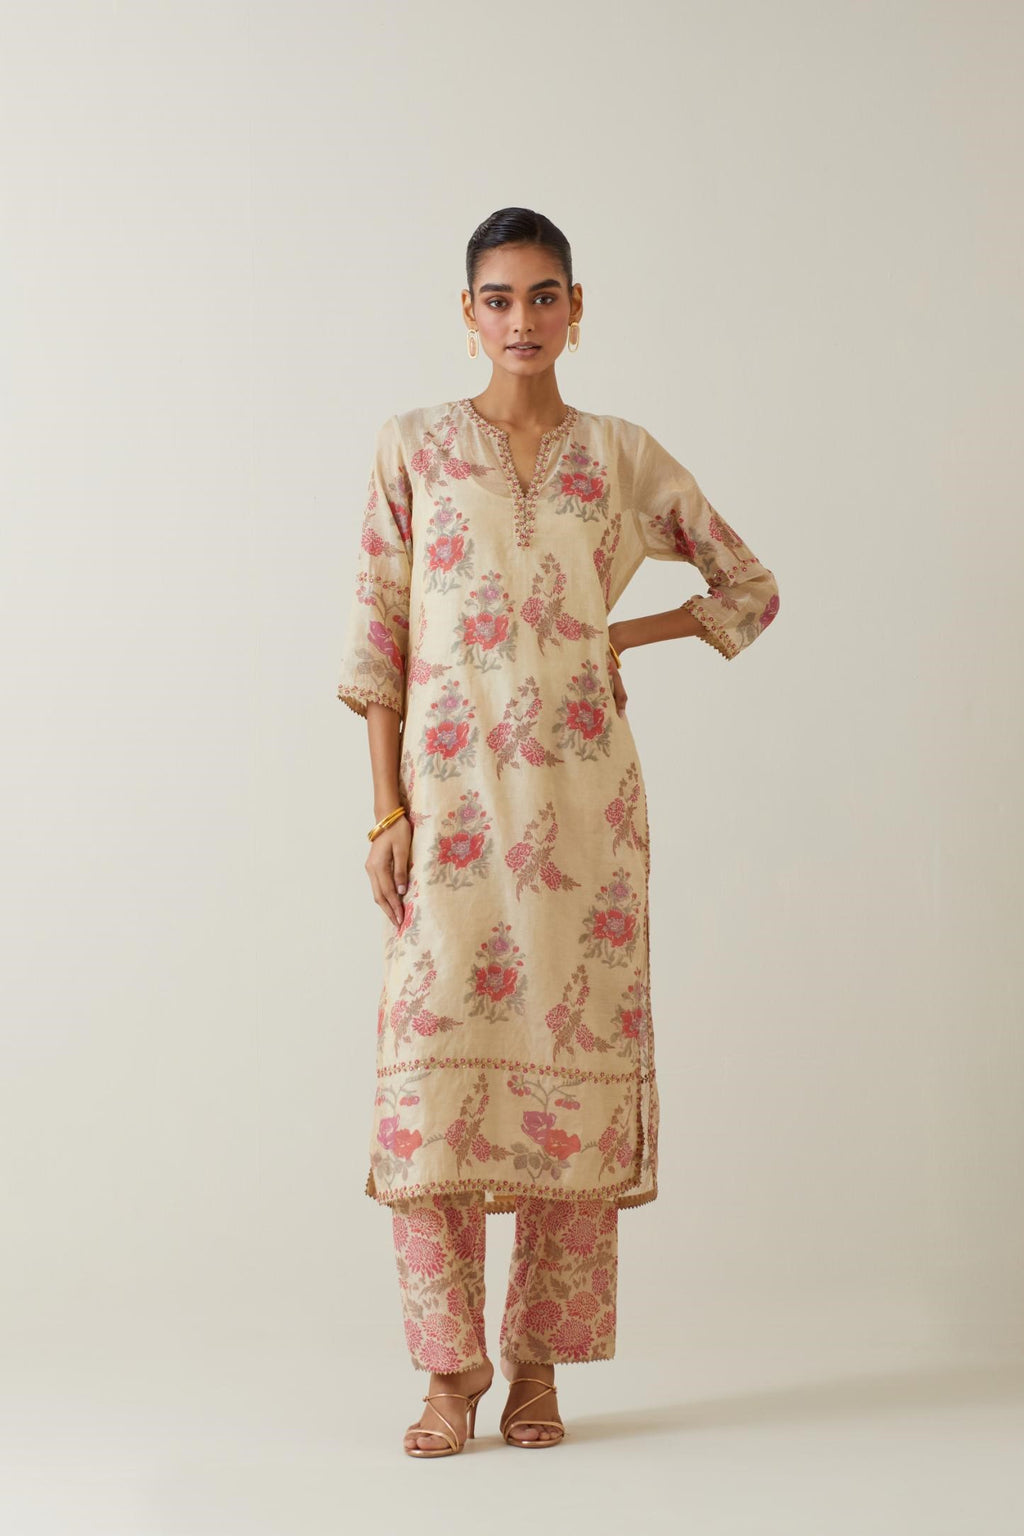 Beige tissue chanderi hand block printed straight kurta set, highlighted with embroidery.